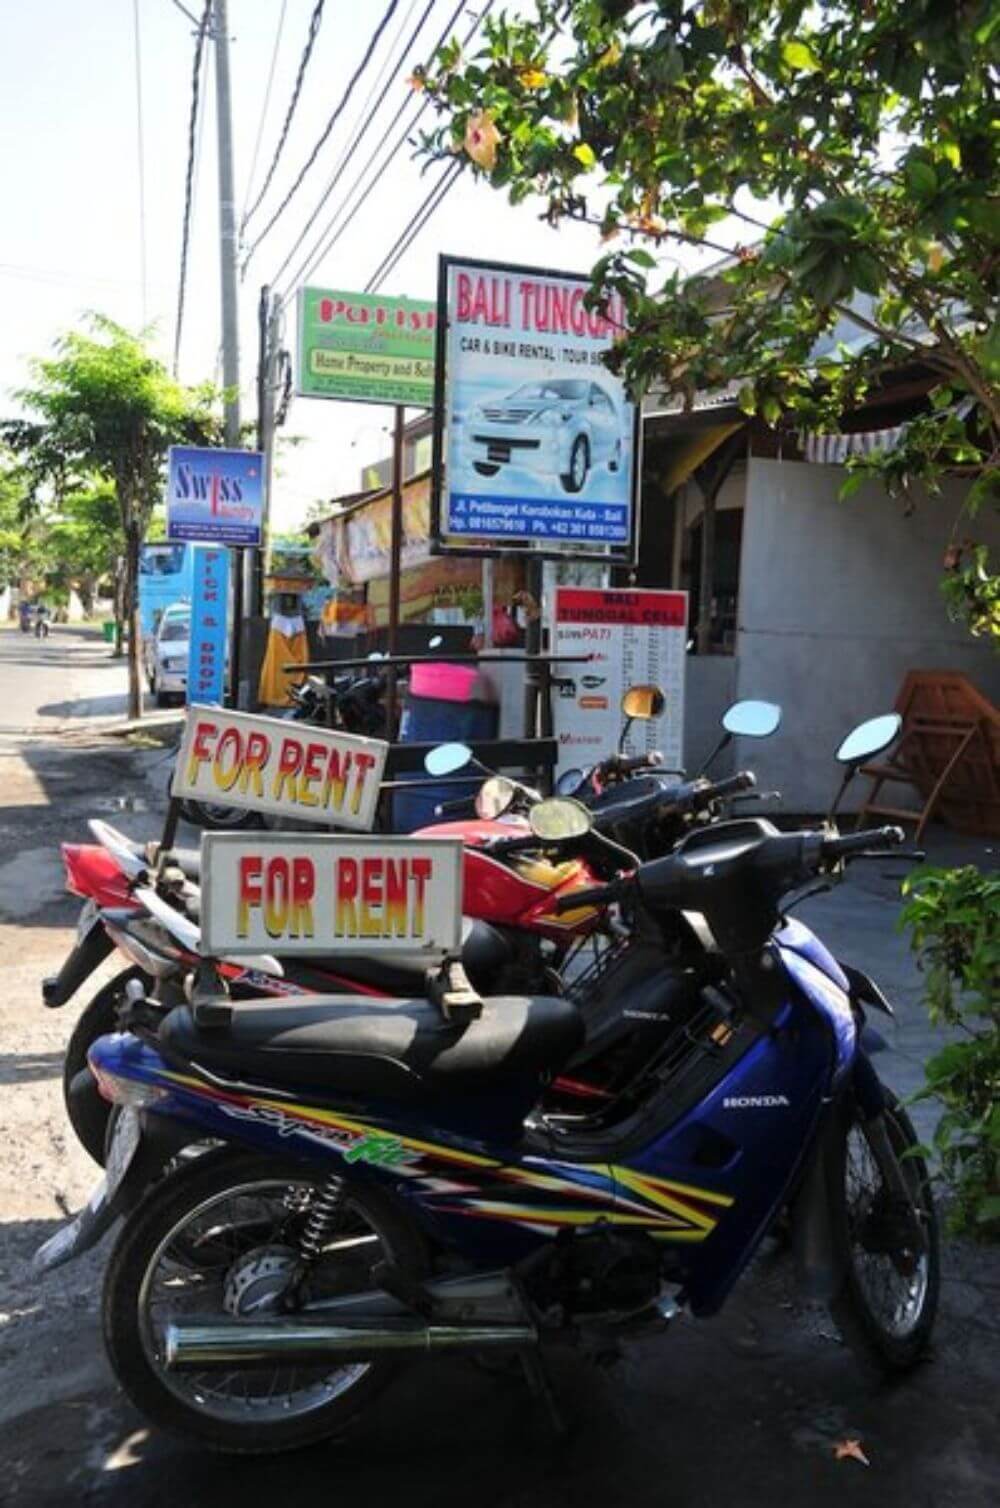 Scooters for rent in Bali, Indonesia